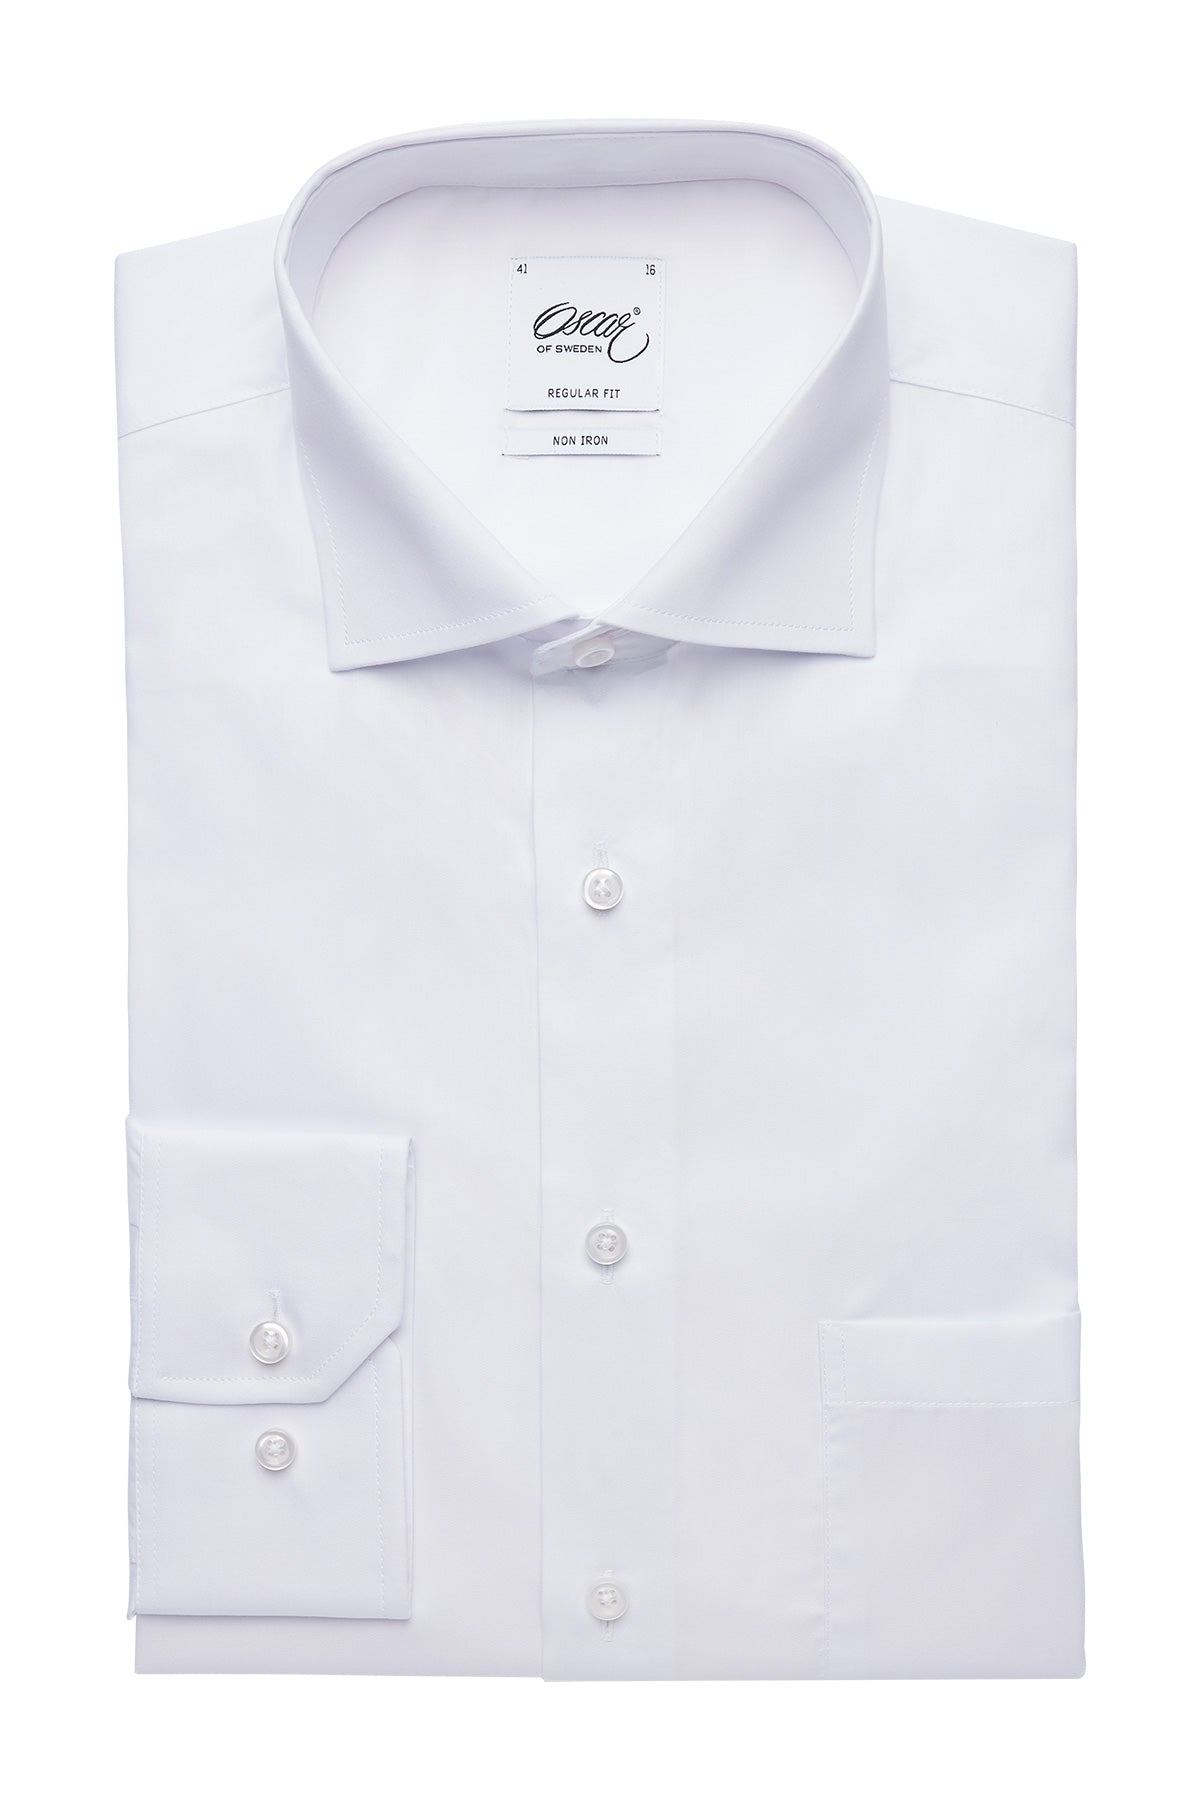 White regular fit shirt with extra long sleeves